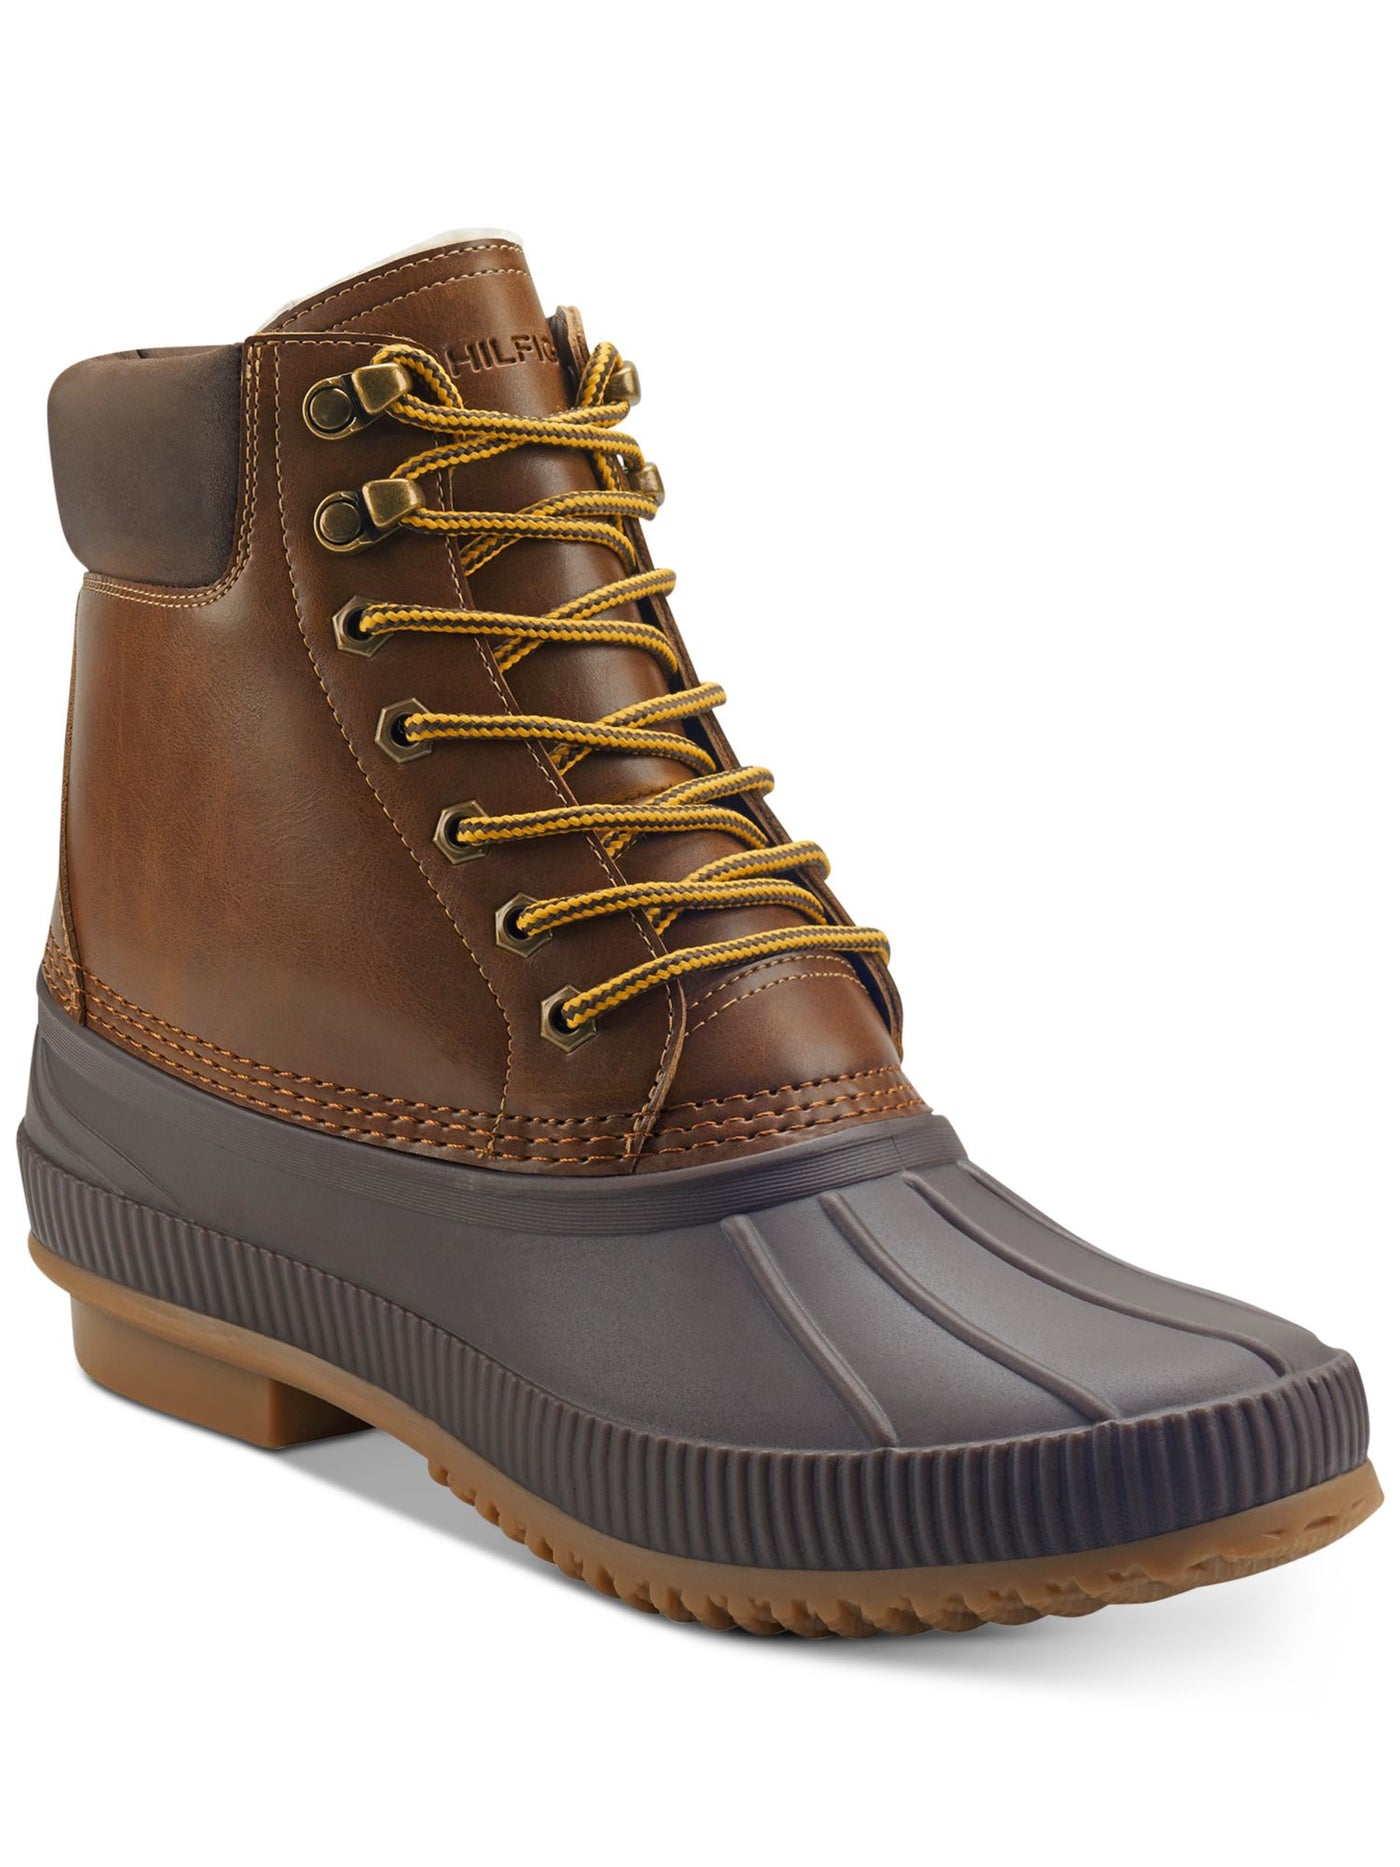 TOMMY HILFIGER Mens Brown Color Block Cushioned Collar Waterproof Padded Colins 2 Round Toe Lace-Up Duck Boots 12